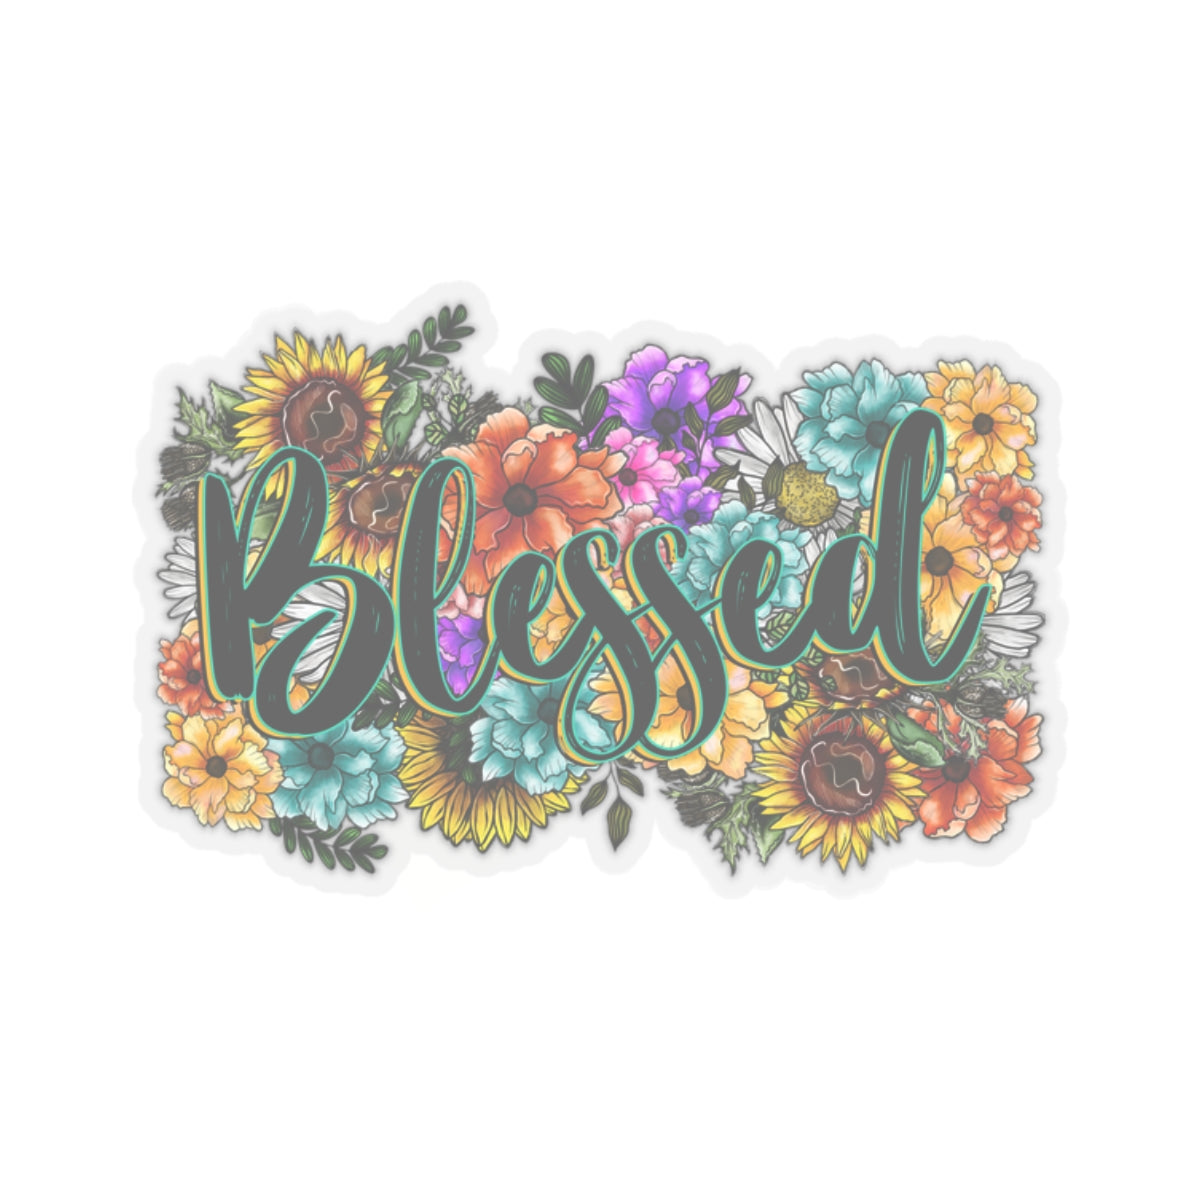 Blessed Kiss-Cut, Christian Stickers